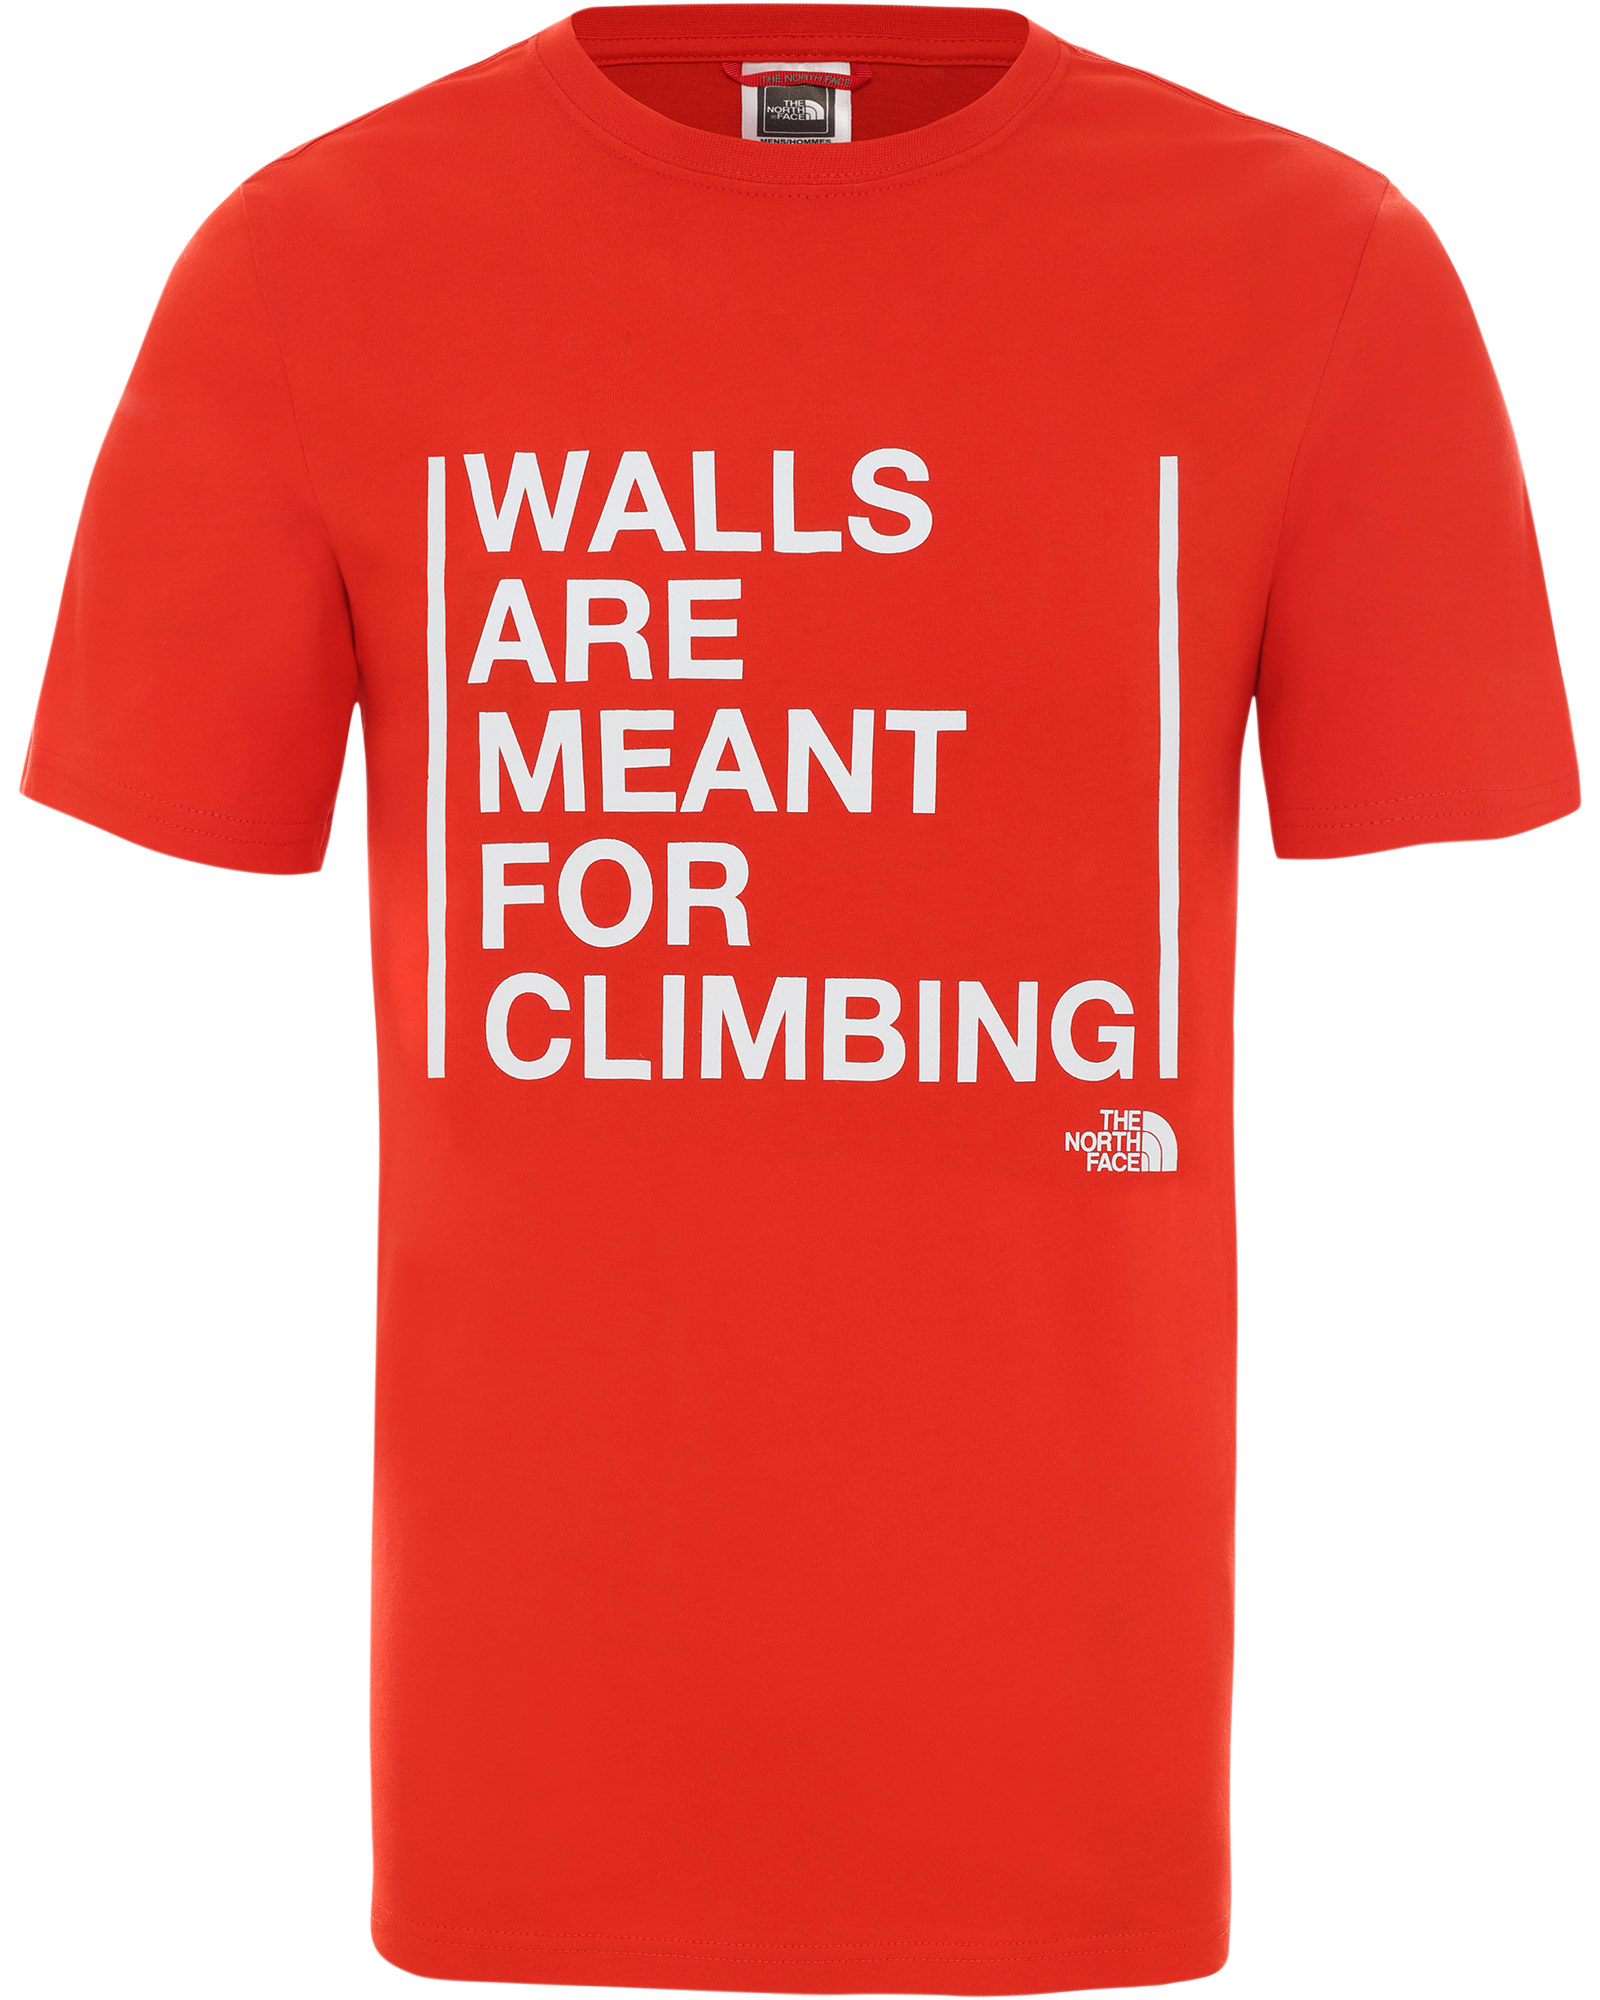 The North Face Walls Are For Climbing Men’s T Shirt - Fiery Red XL